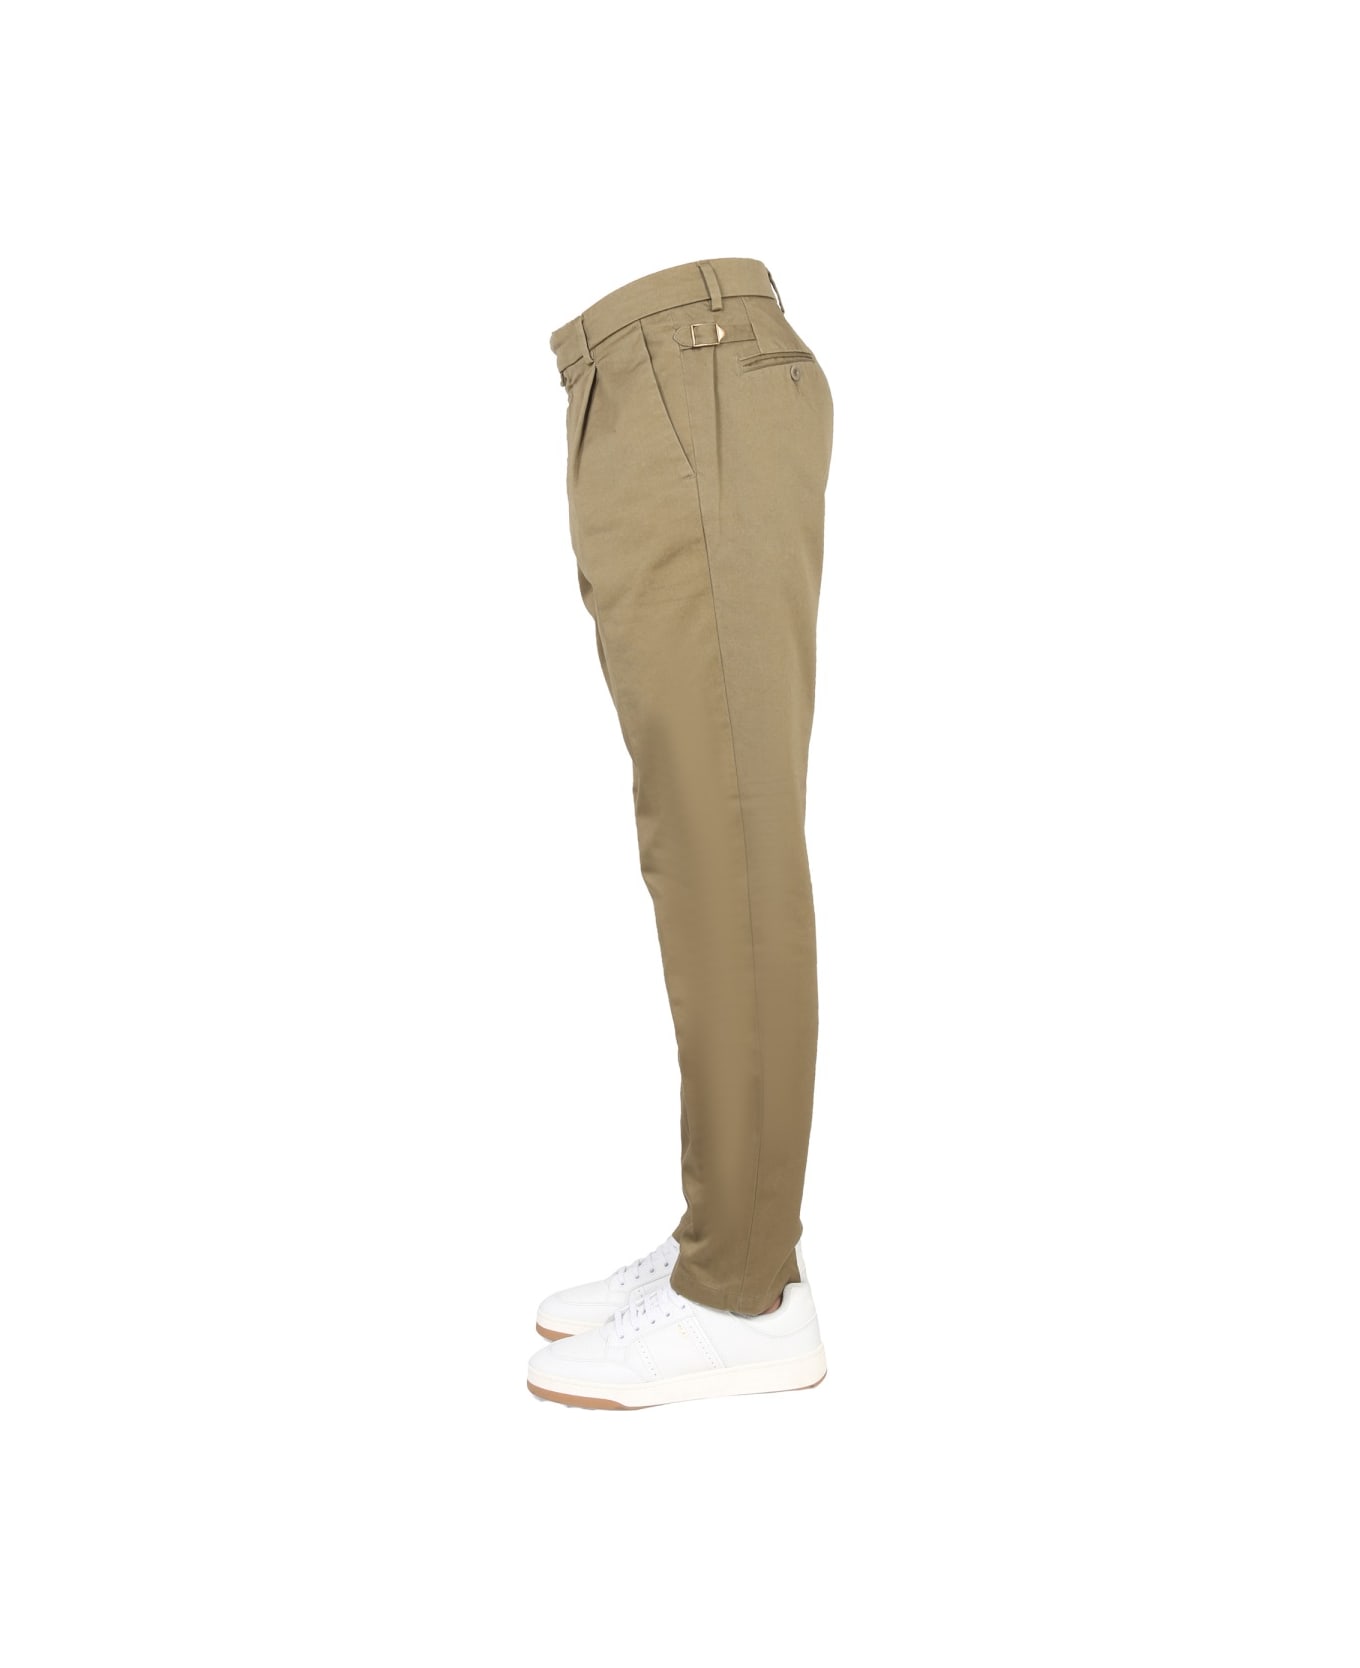 East Harbour Surplus Chino Pants - MILITARY GREEN ボトムス